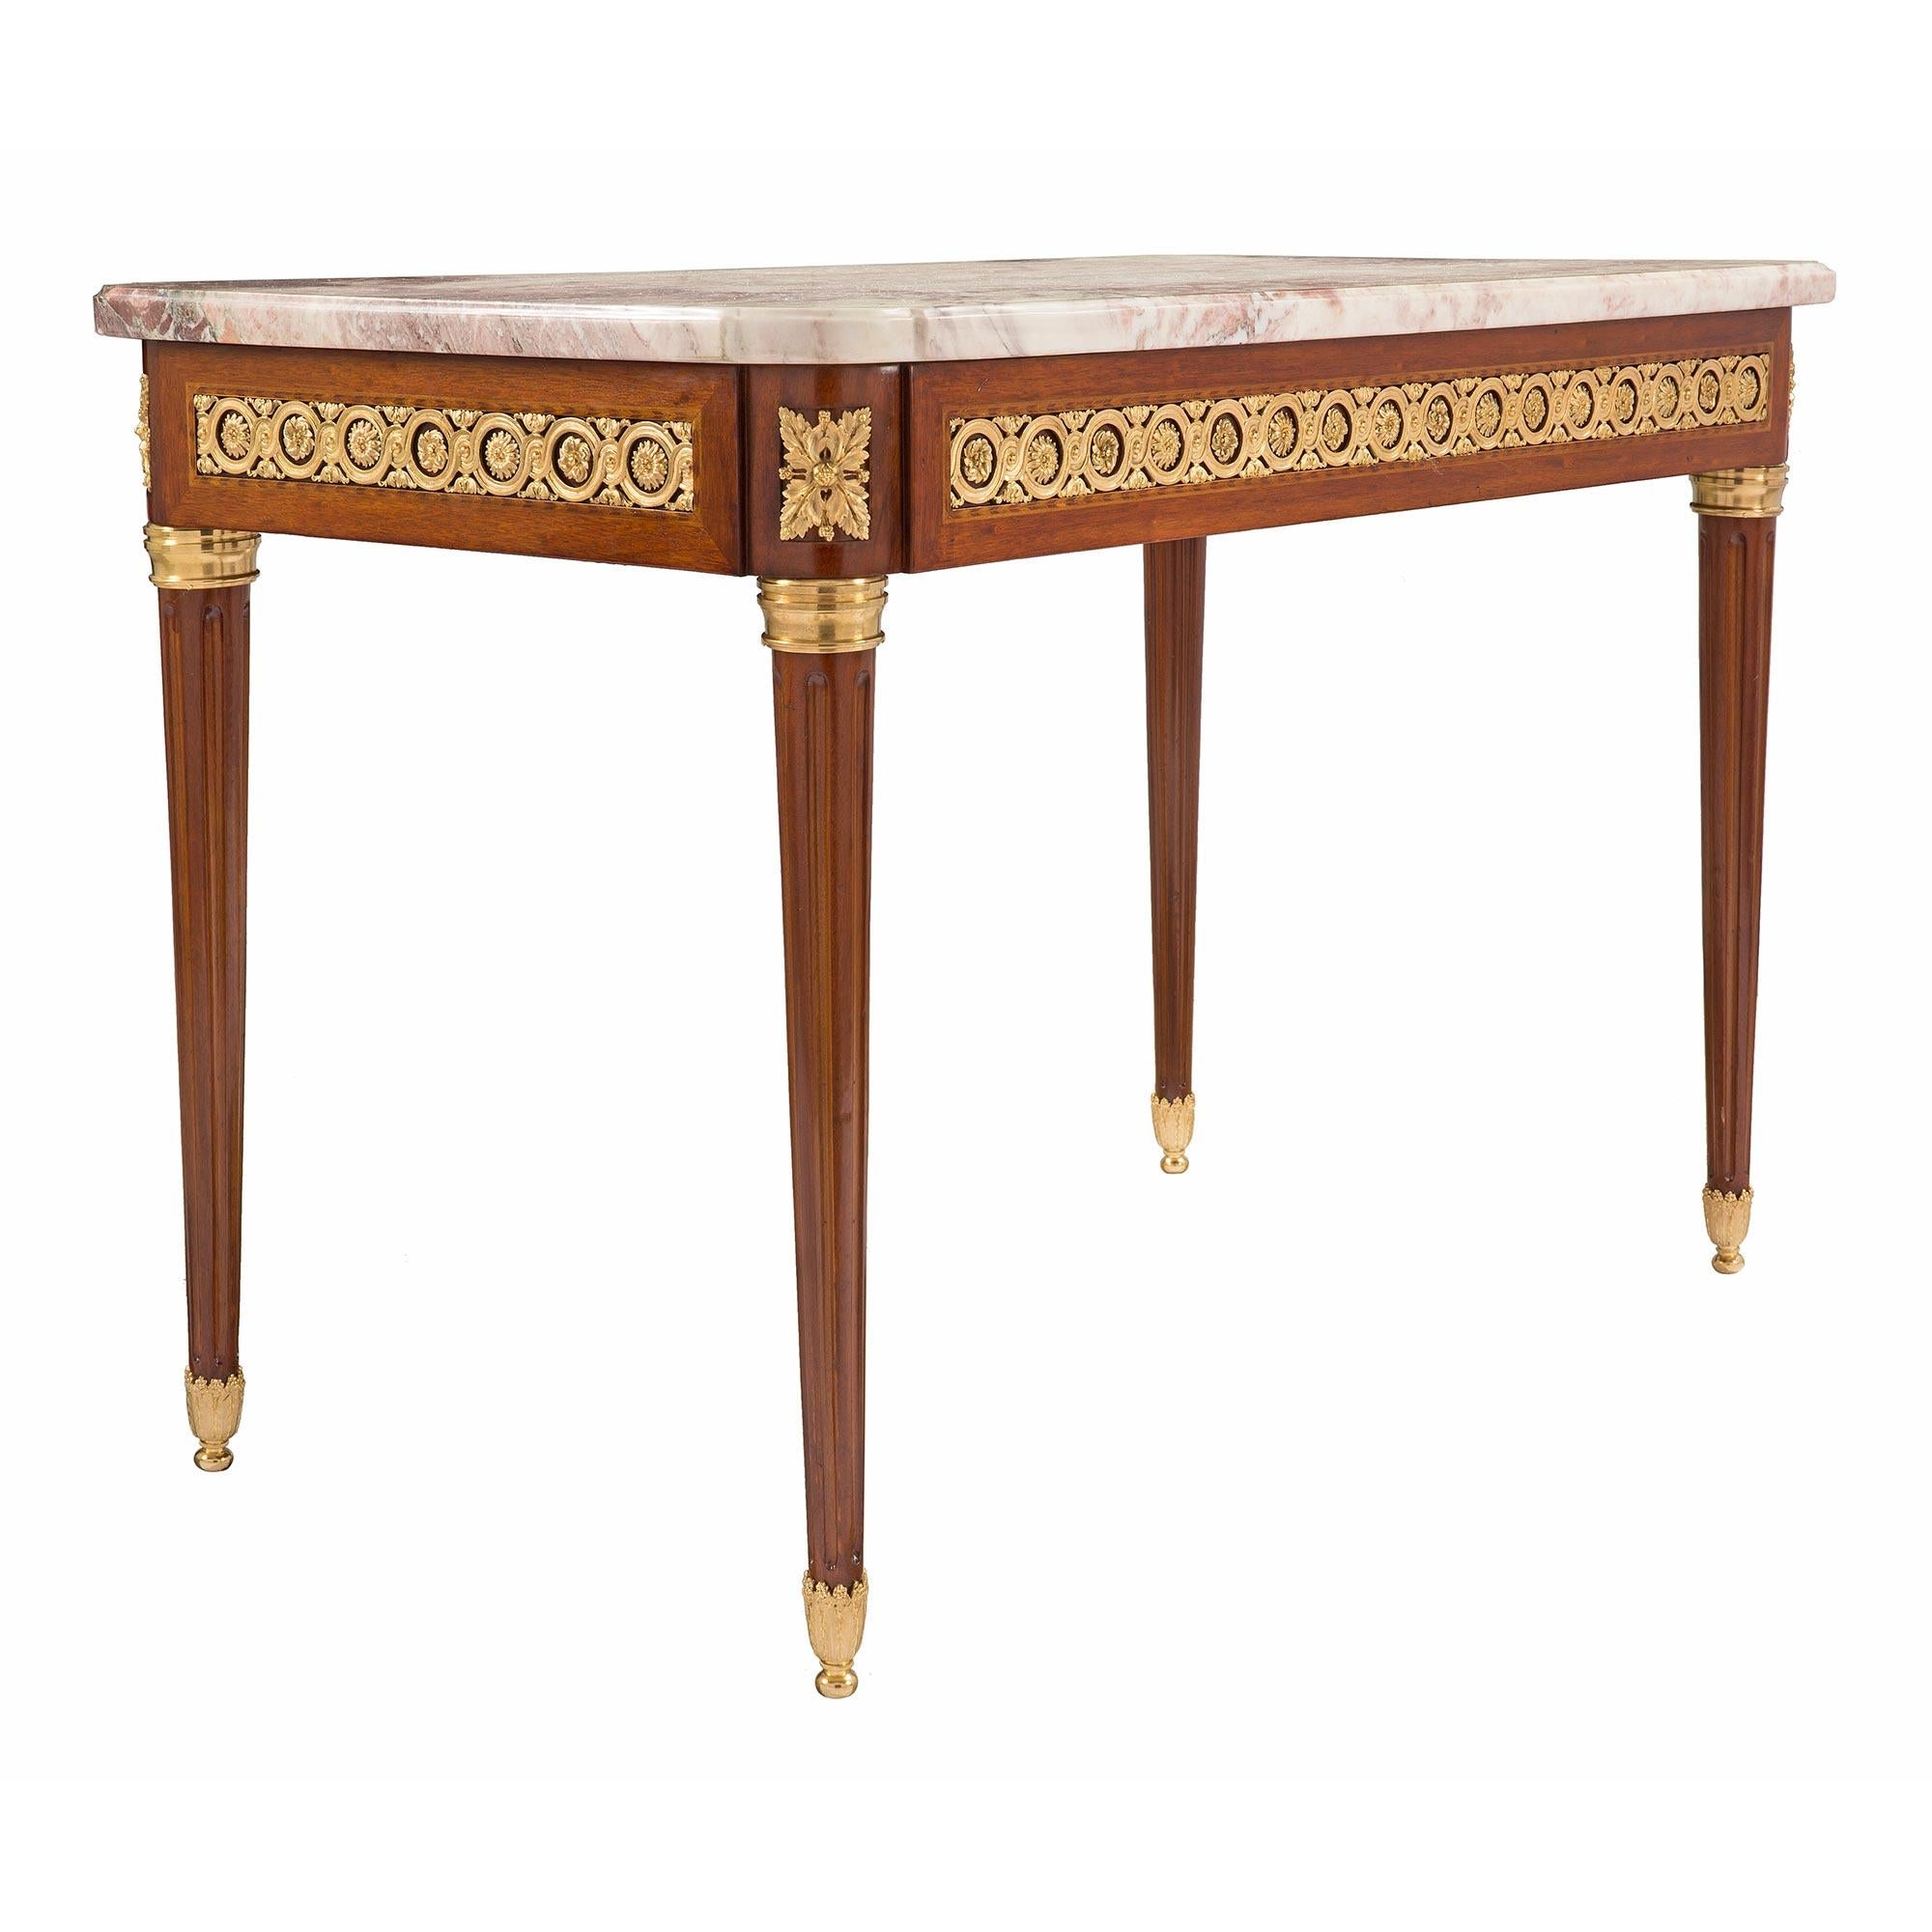 French 19th Century Louis XVI Style Mahogany and Ormolu Center Table In Good Condition For Sale In West Palm Beach, FL